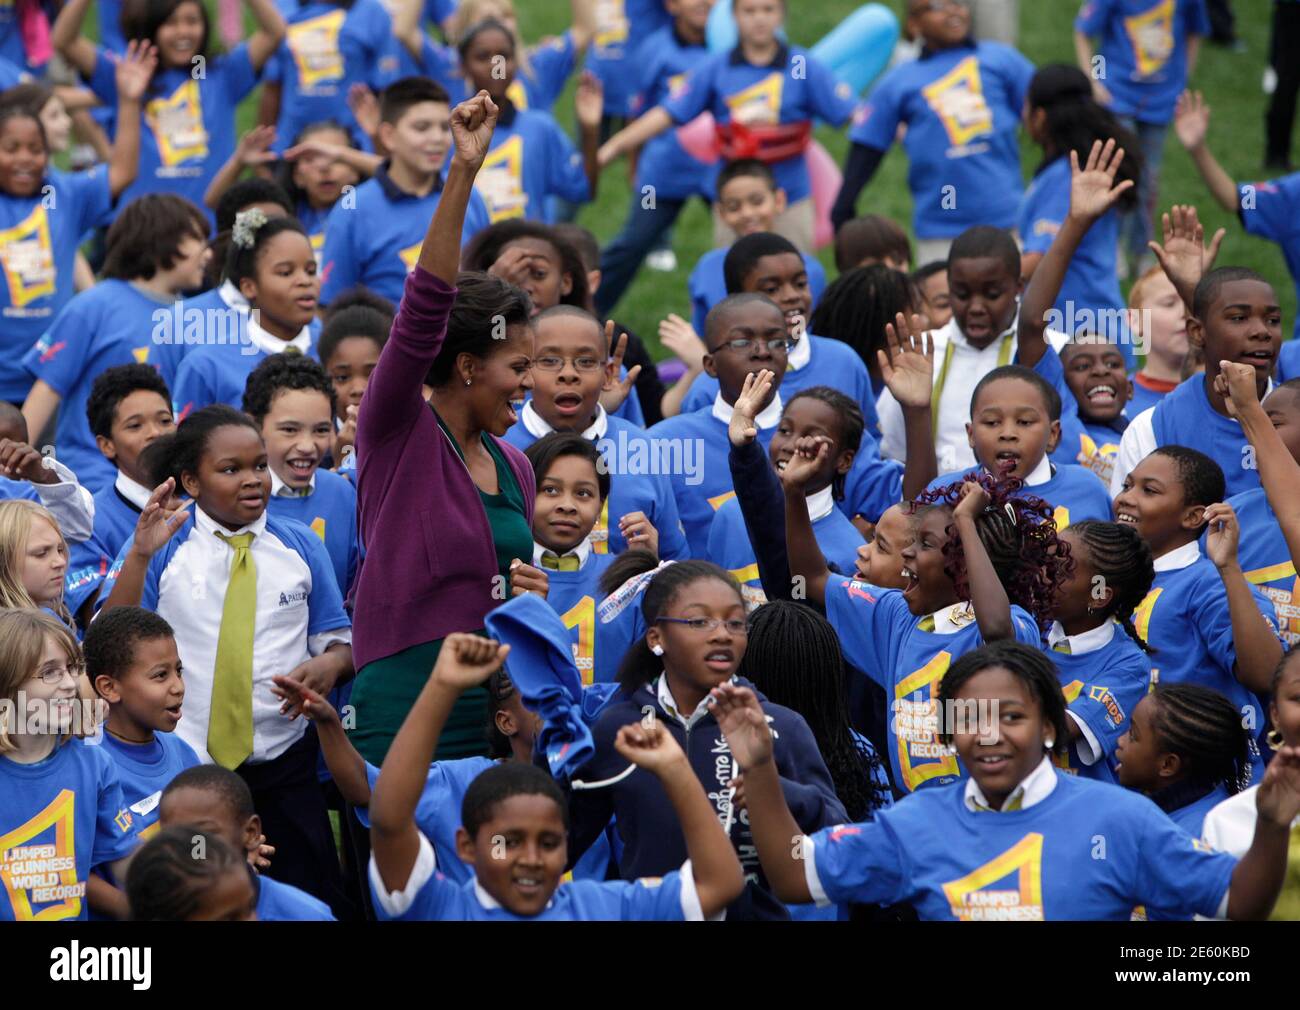 U.S. first lady Michelle Obama greets children at an event on the South Lawn of the White House in Washington October 11, 2011 to launch a challenge to help break the Guinness World Records title for the most people doing jumping jacks in a 24-hour period. To break the record, more than 20,000 people from around the world must perform jumping jacks for one minute. REUTERS/Yuri Gripas (UNITED STATES - Tags: POLITICS) Stock Photo